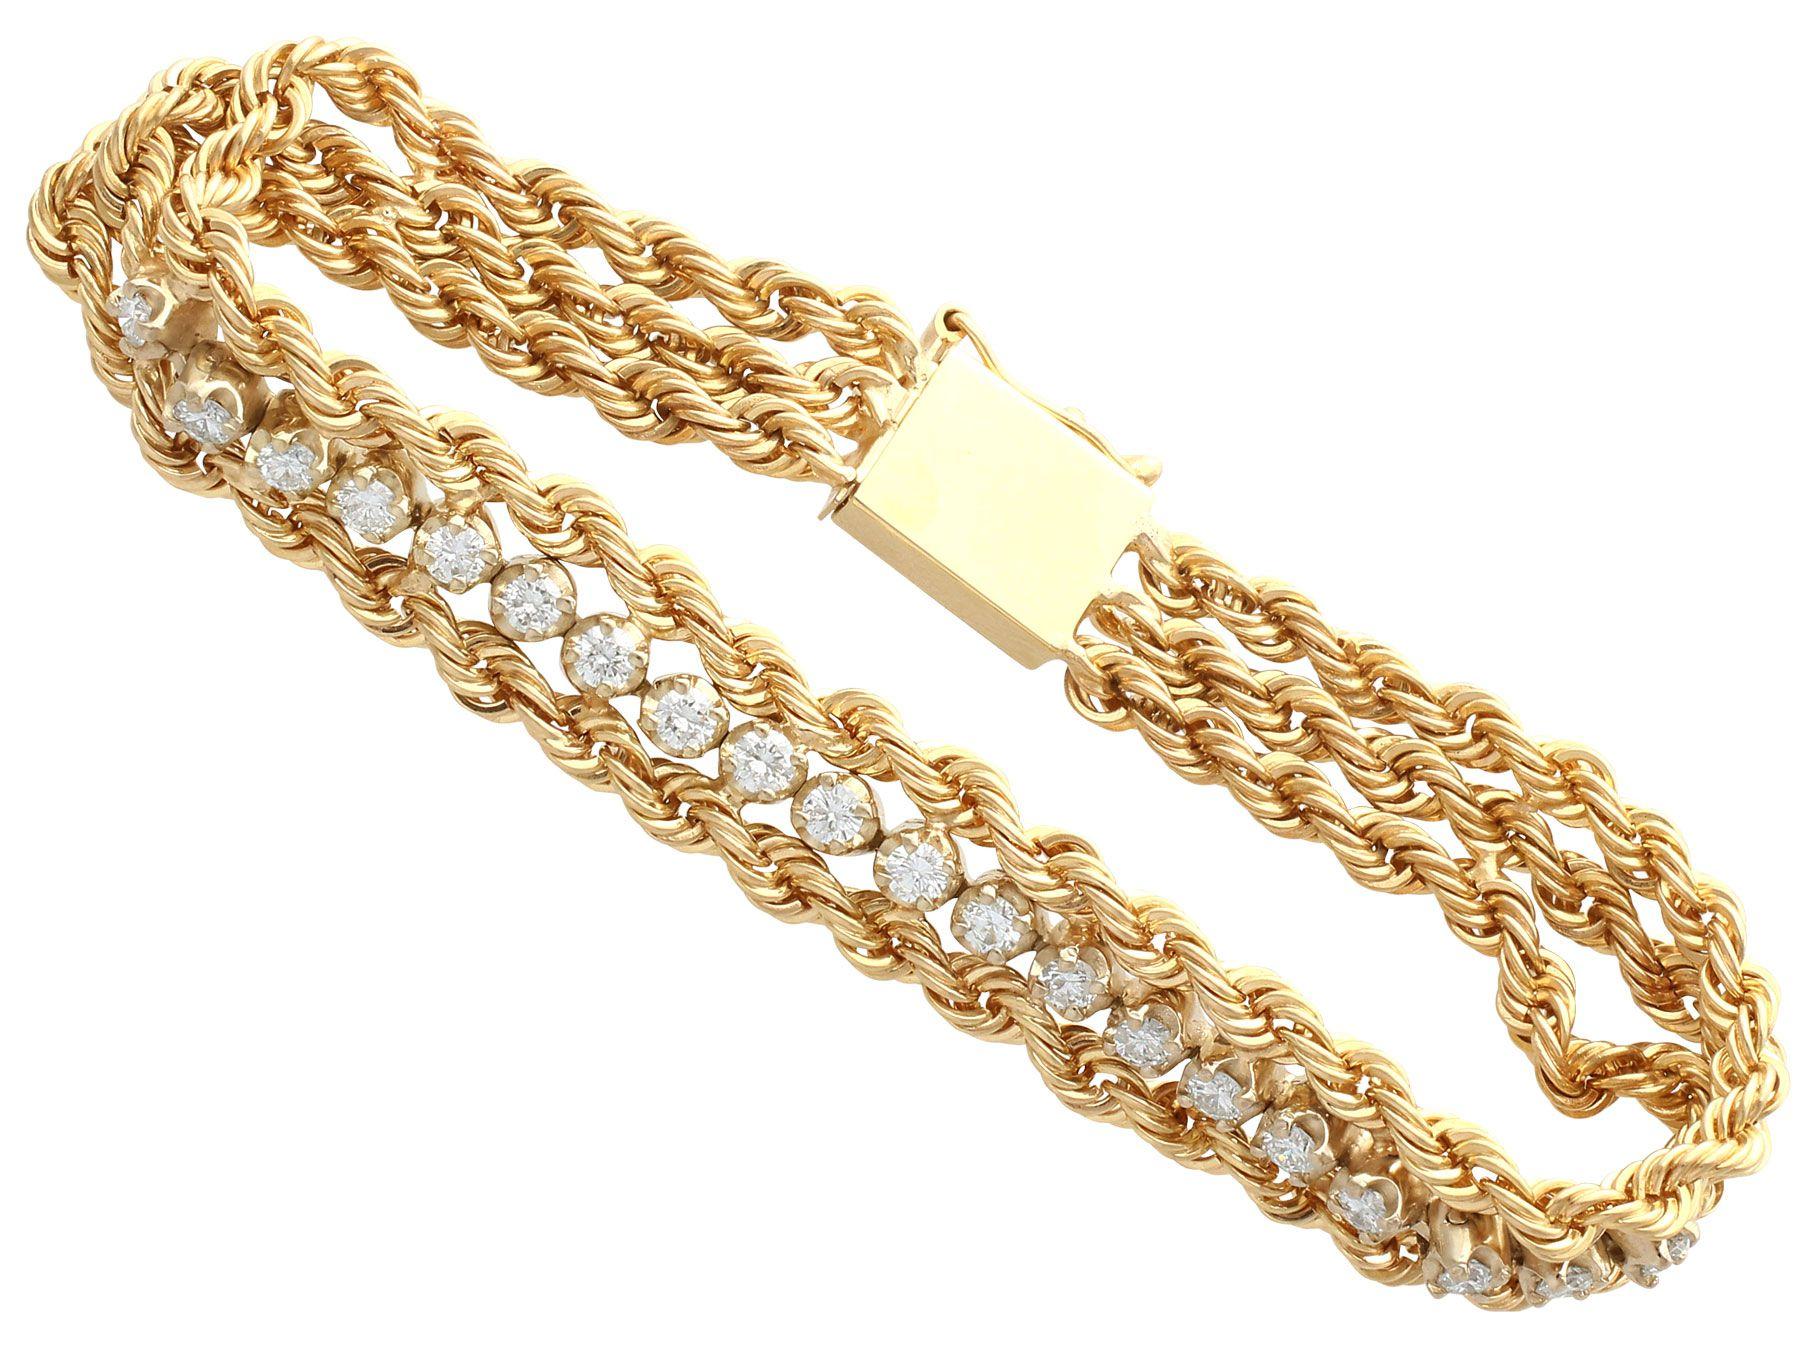 A fine and impressive 1.50 carat diamond rope bracelet in 14 karat yellow gold; part of our diverse vintage jewelry and estate jewelry collections.

This impressive diamond rope bracelet has been crafted in 14 karat yellow gold.

Three feature rope